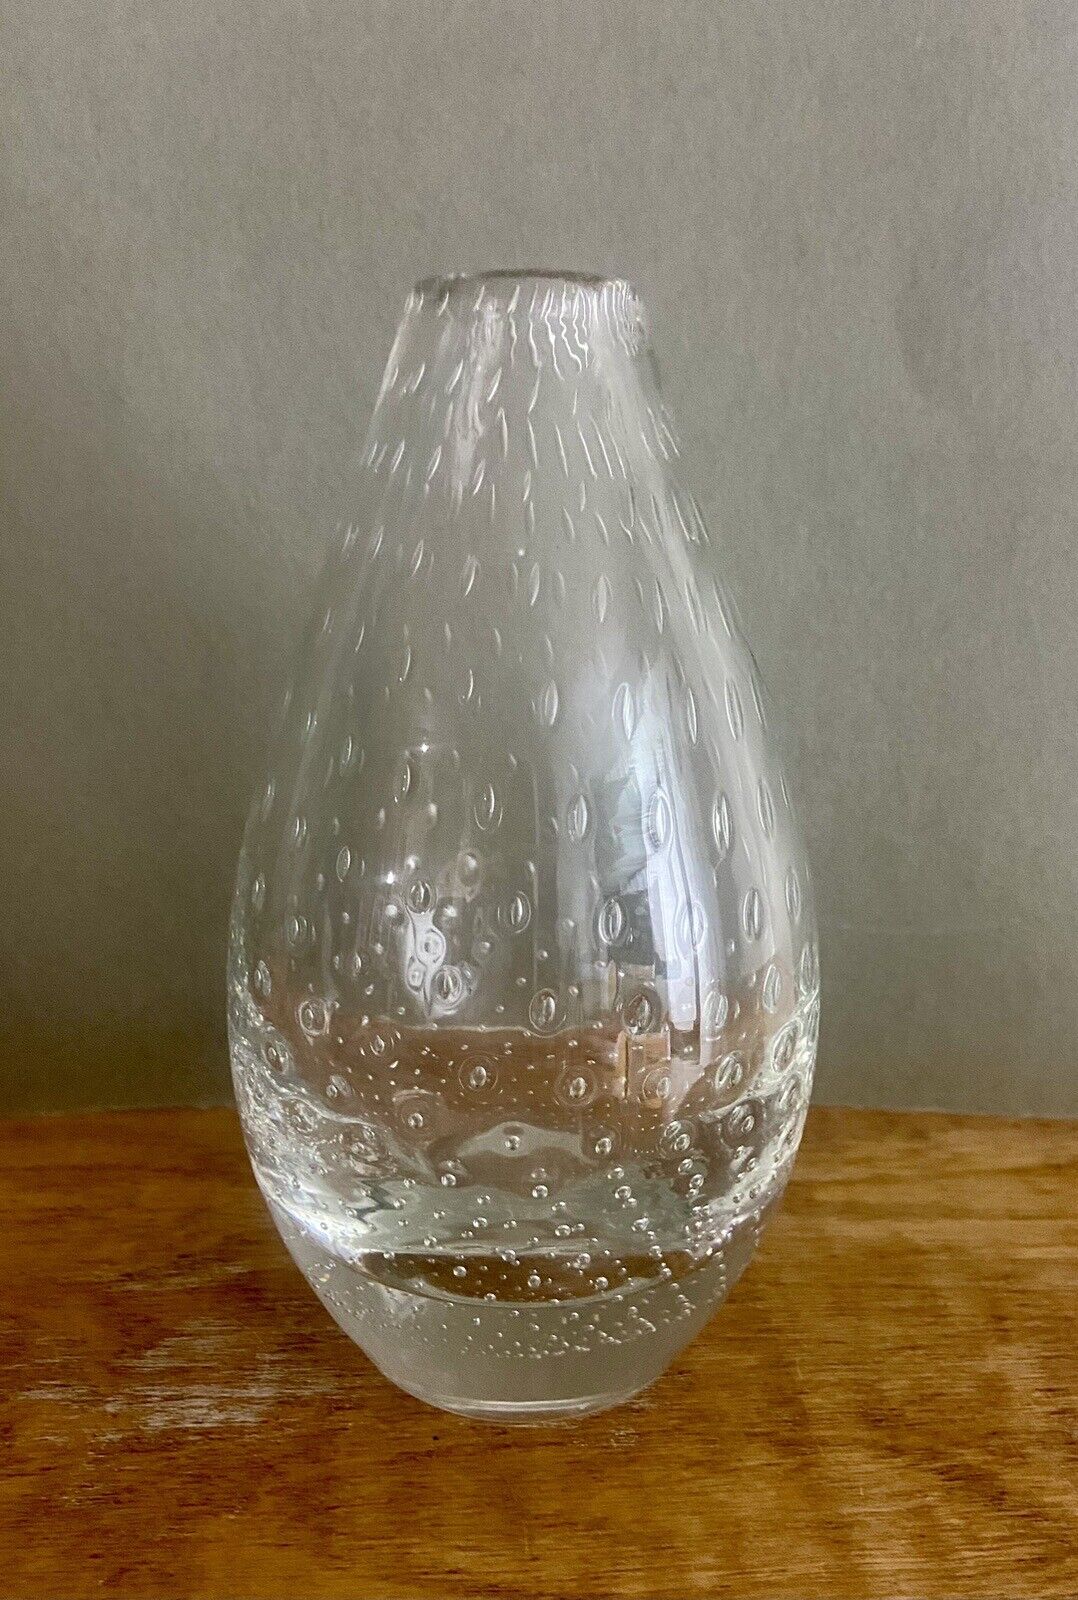 Vintage Art Glass Vase by Hirschberg w/Exquisite Bubbles 1970’s Germany